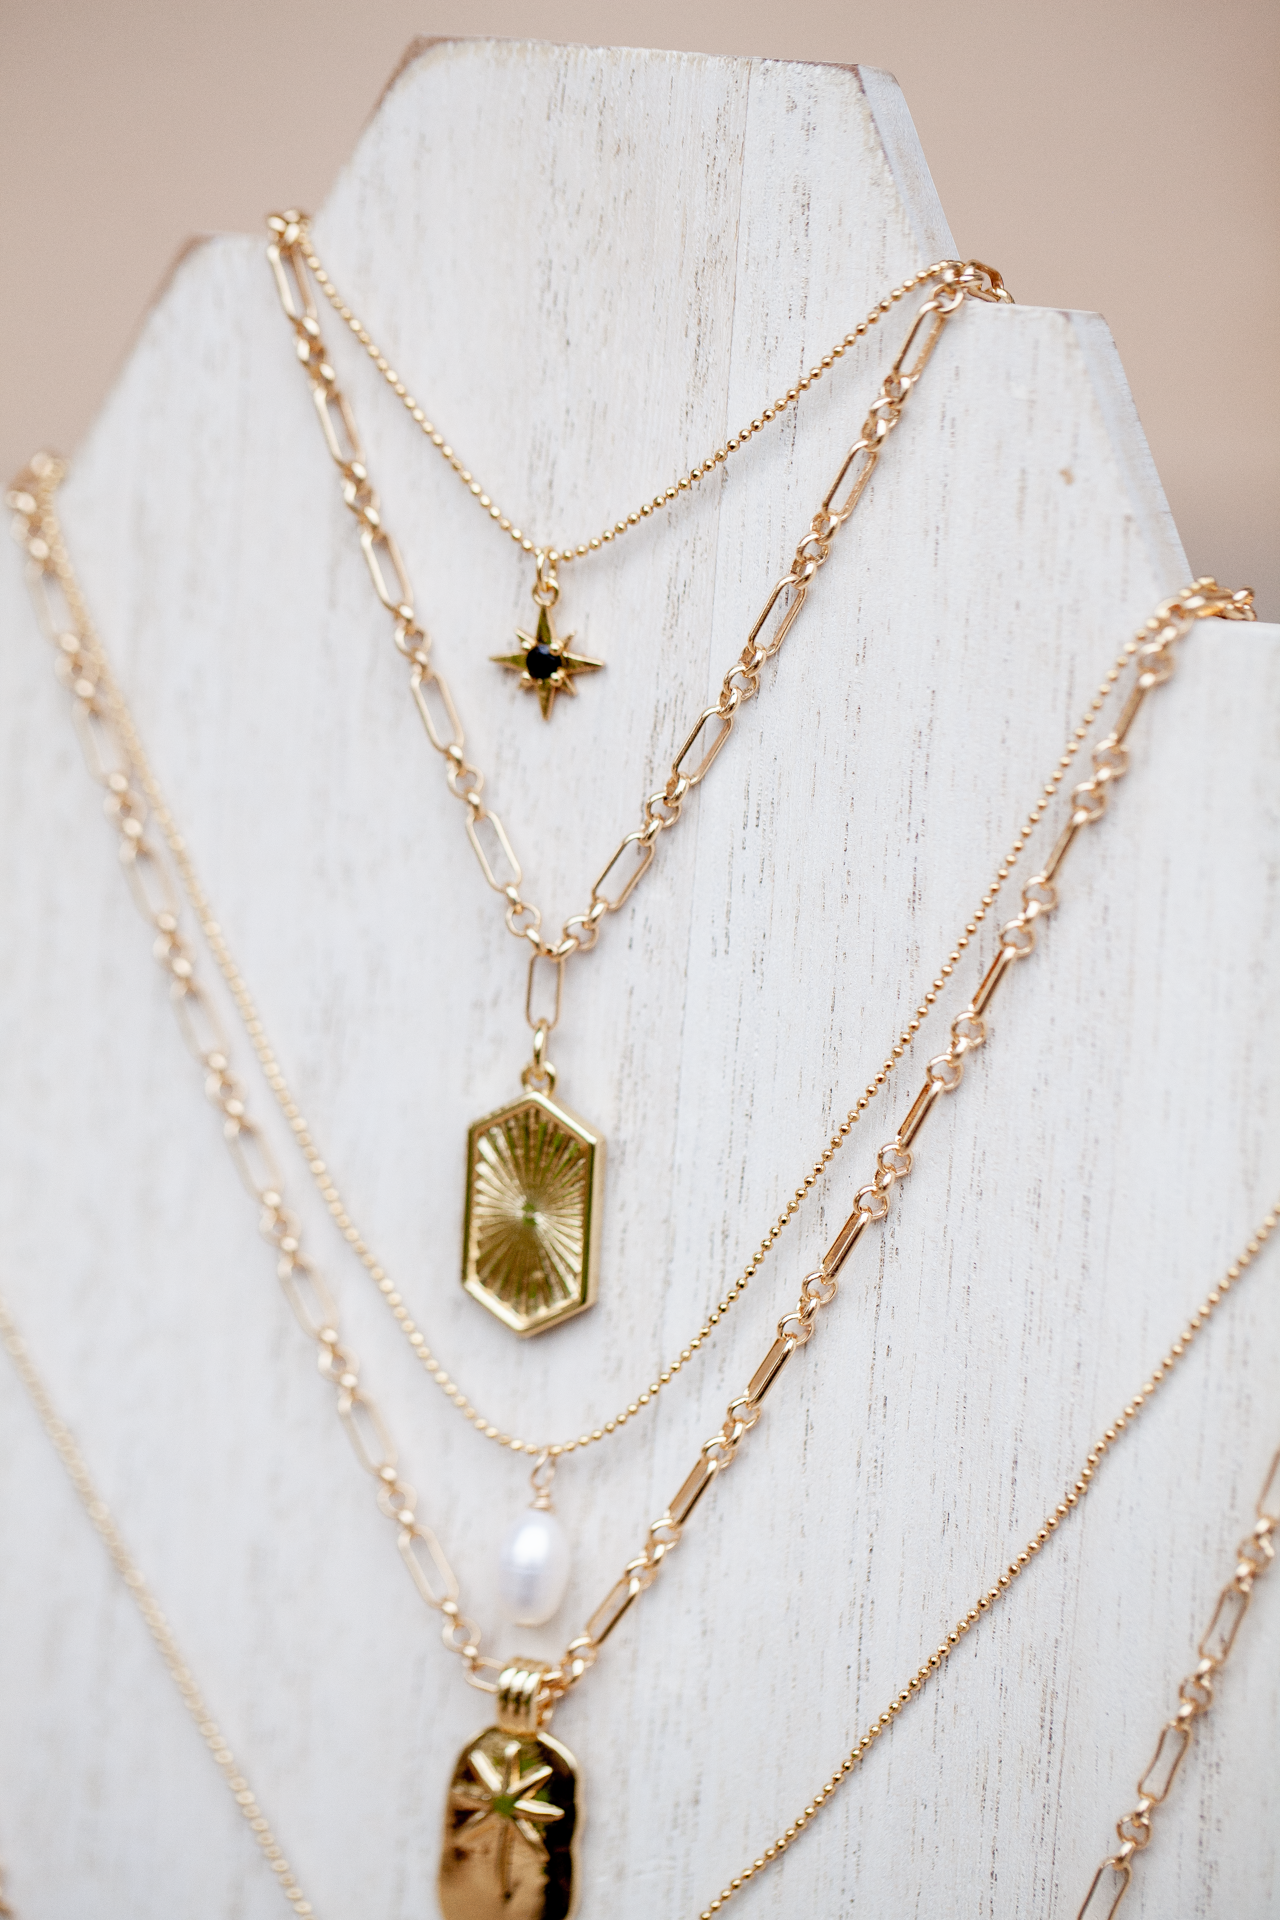 Necklace Subscription Box ~ yearly